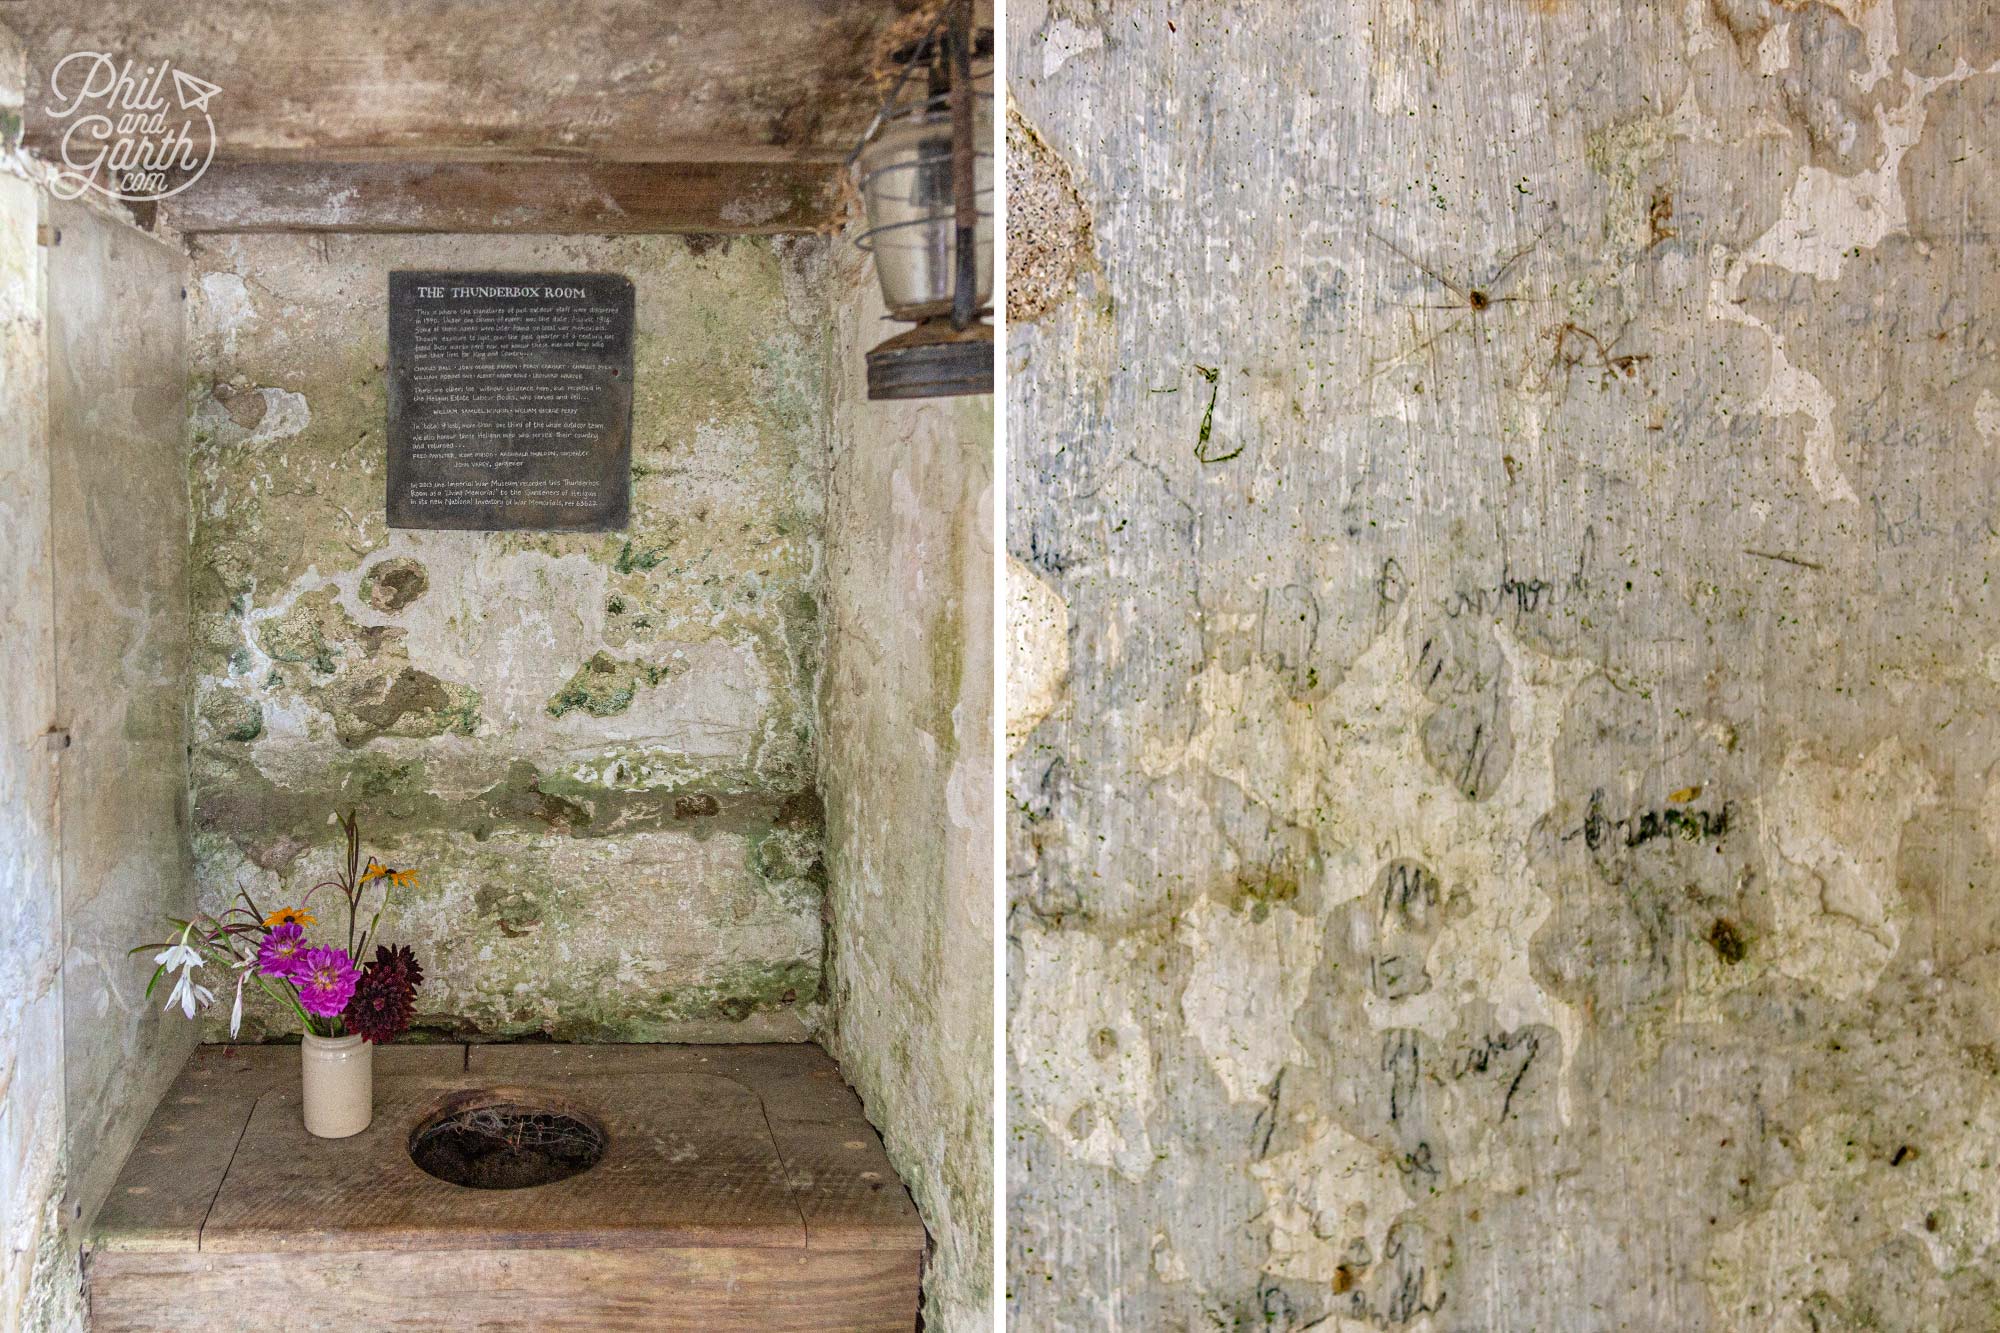 Heligan's gardeners left their names on the wall in the ‘thunderbox room’ before they departed to serve in WW1